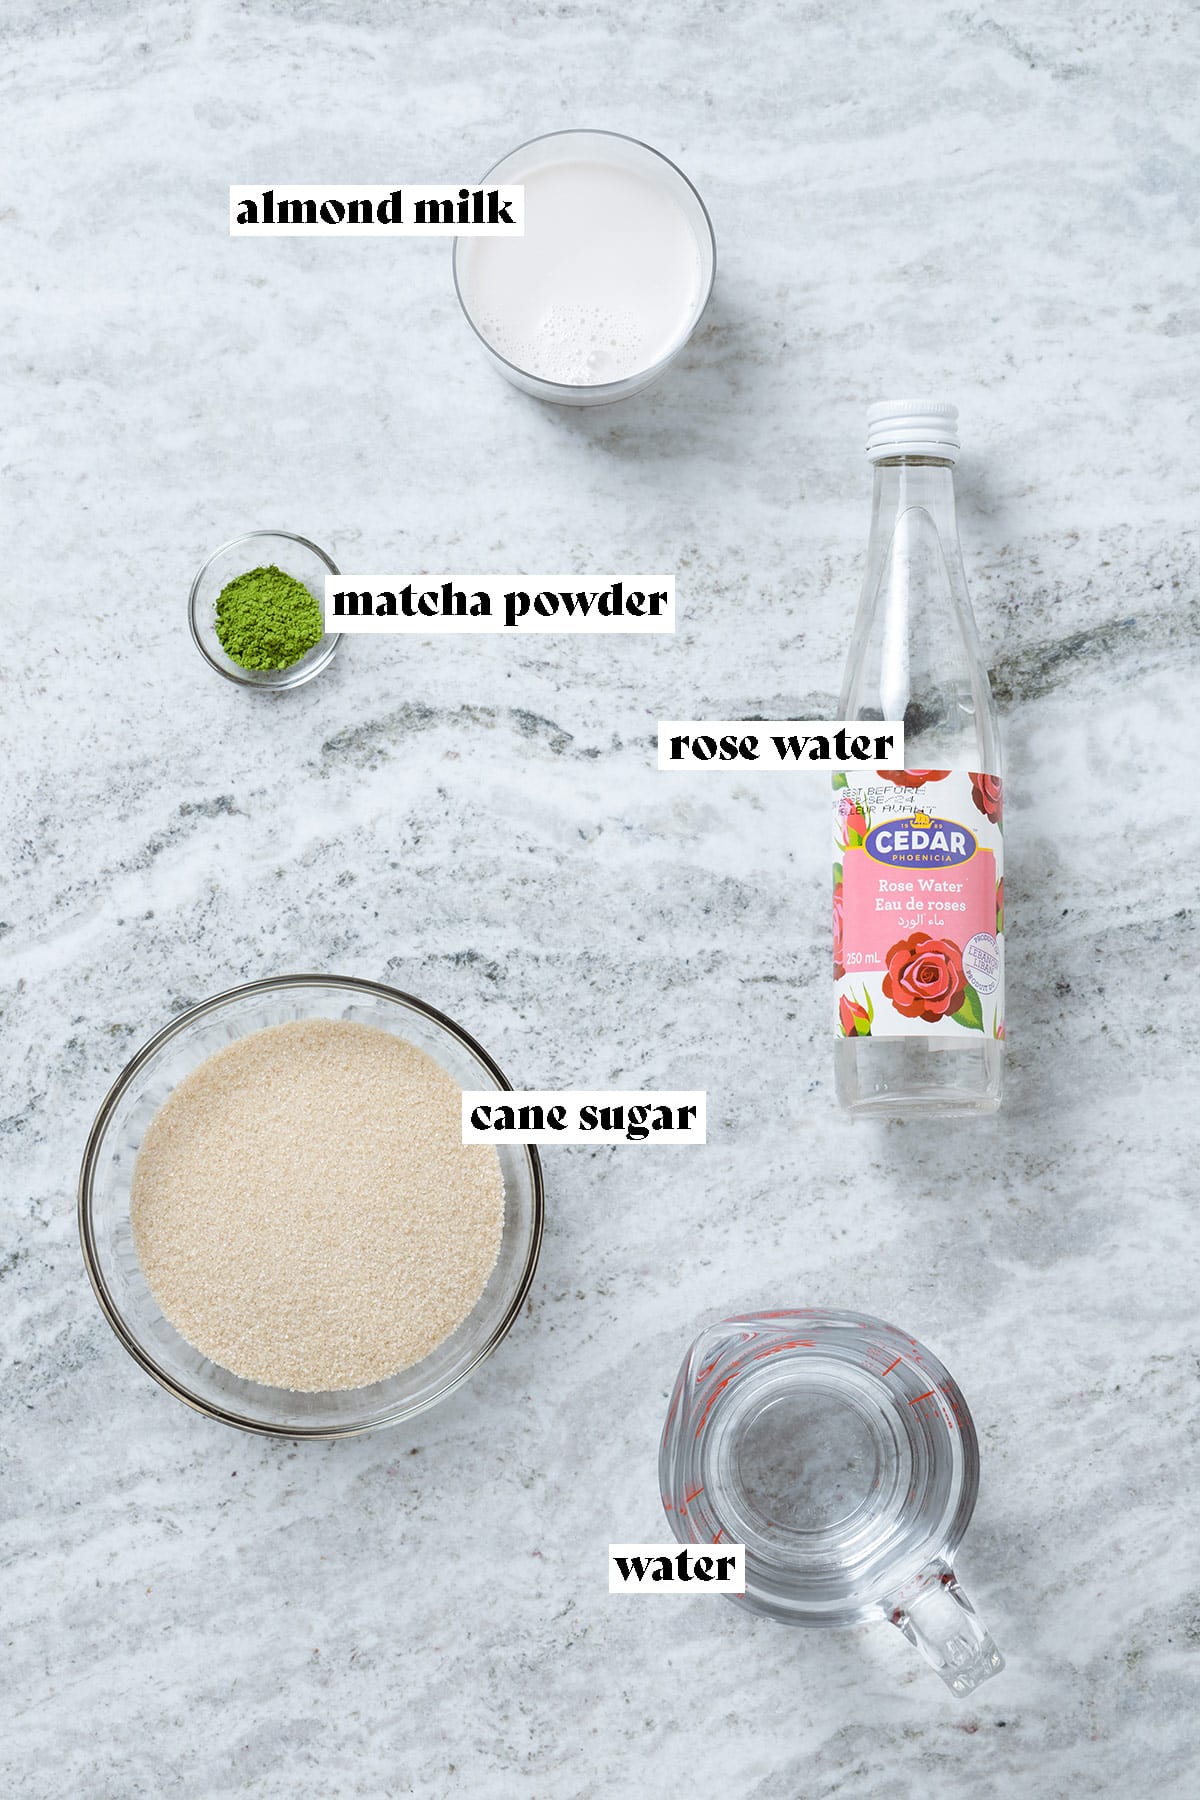 Cane sugar, matcha powder, milk, water, and rose water all measured and laid out with text overlay.